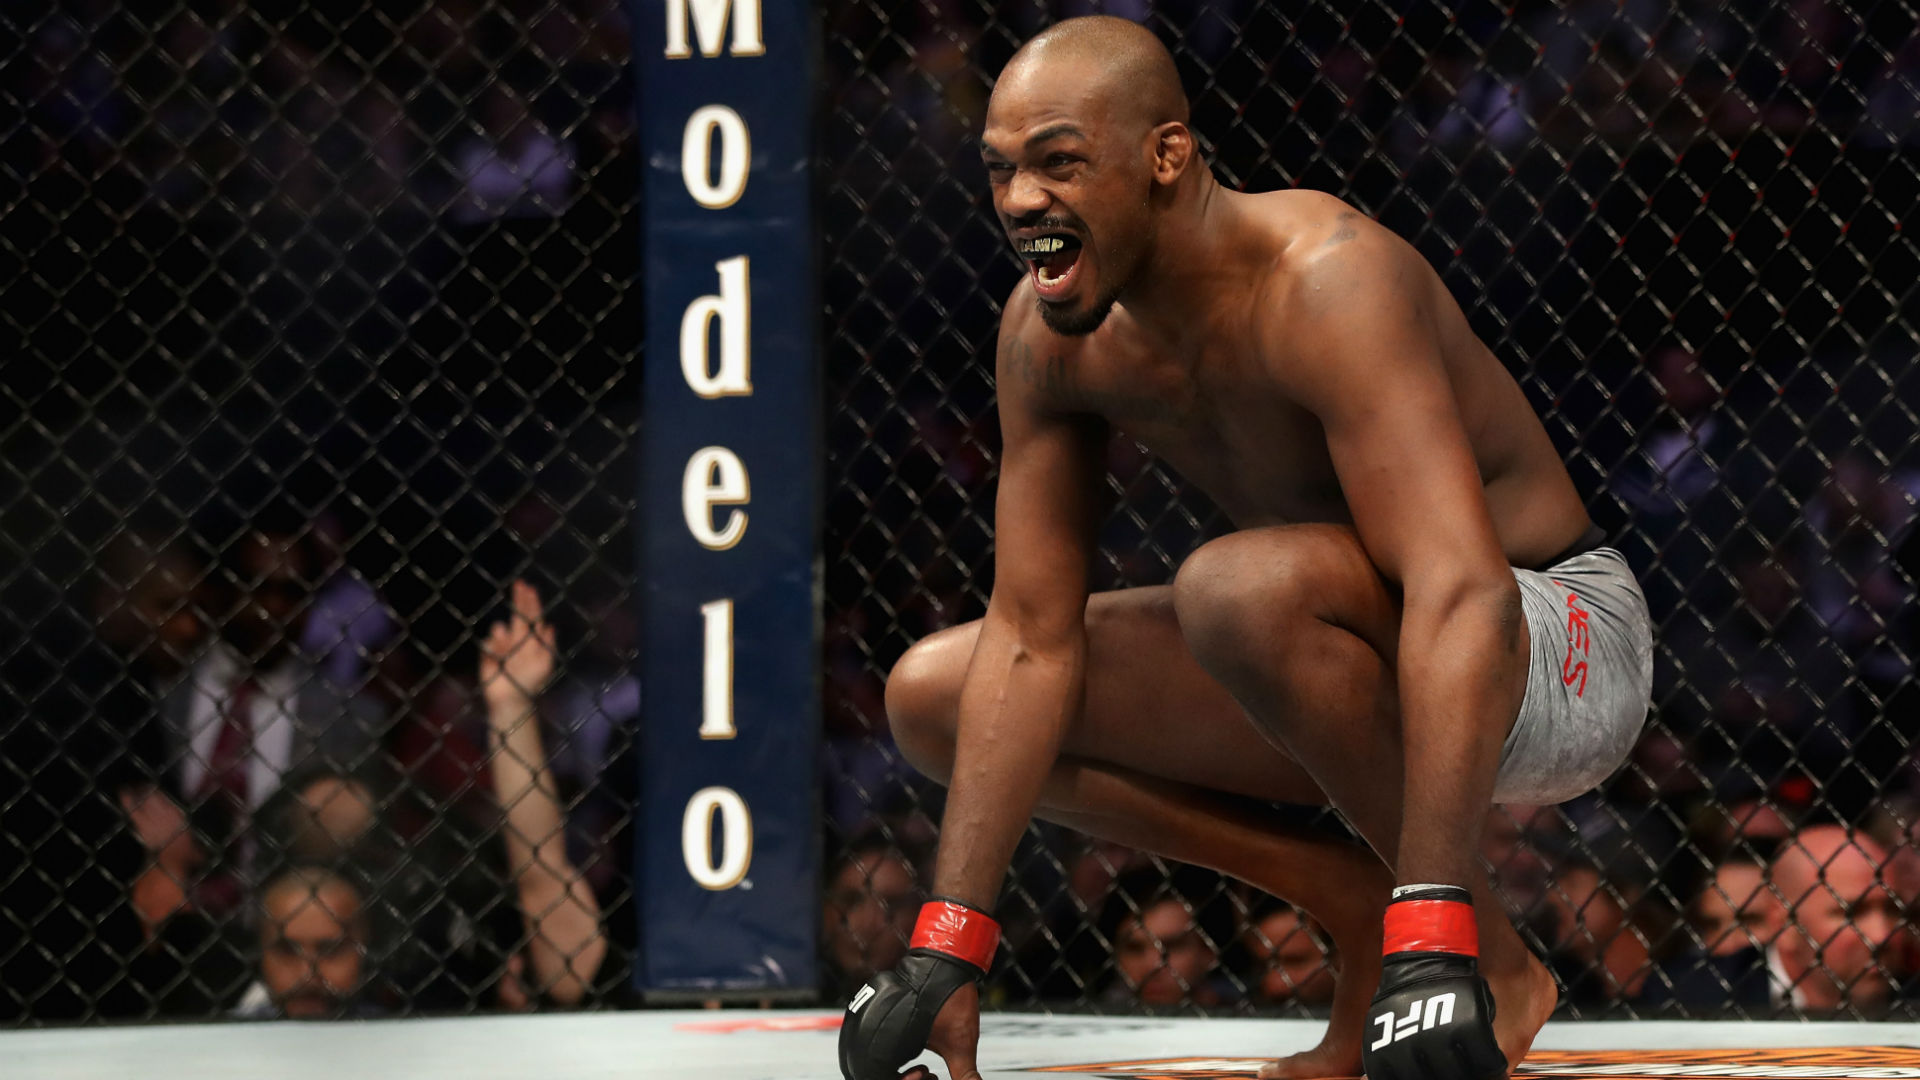 UFC 235: Jon Jones on chasing greatness and how he'll put his past behind him